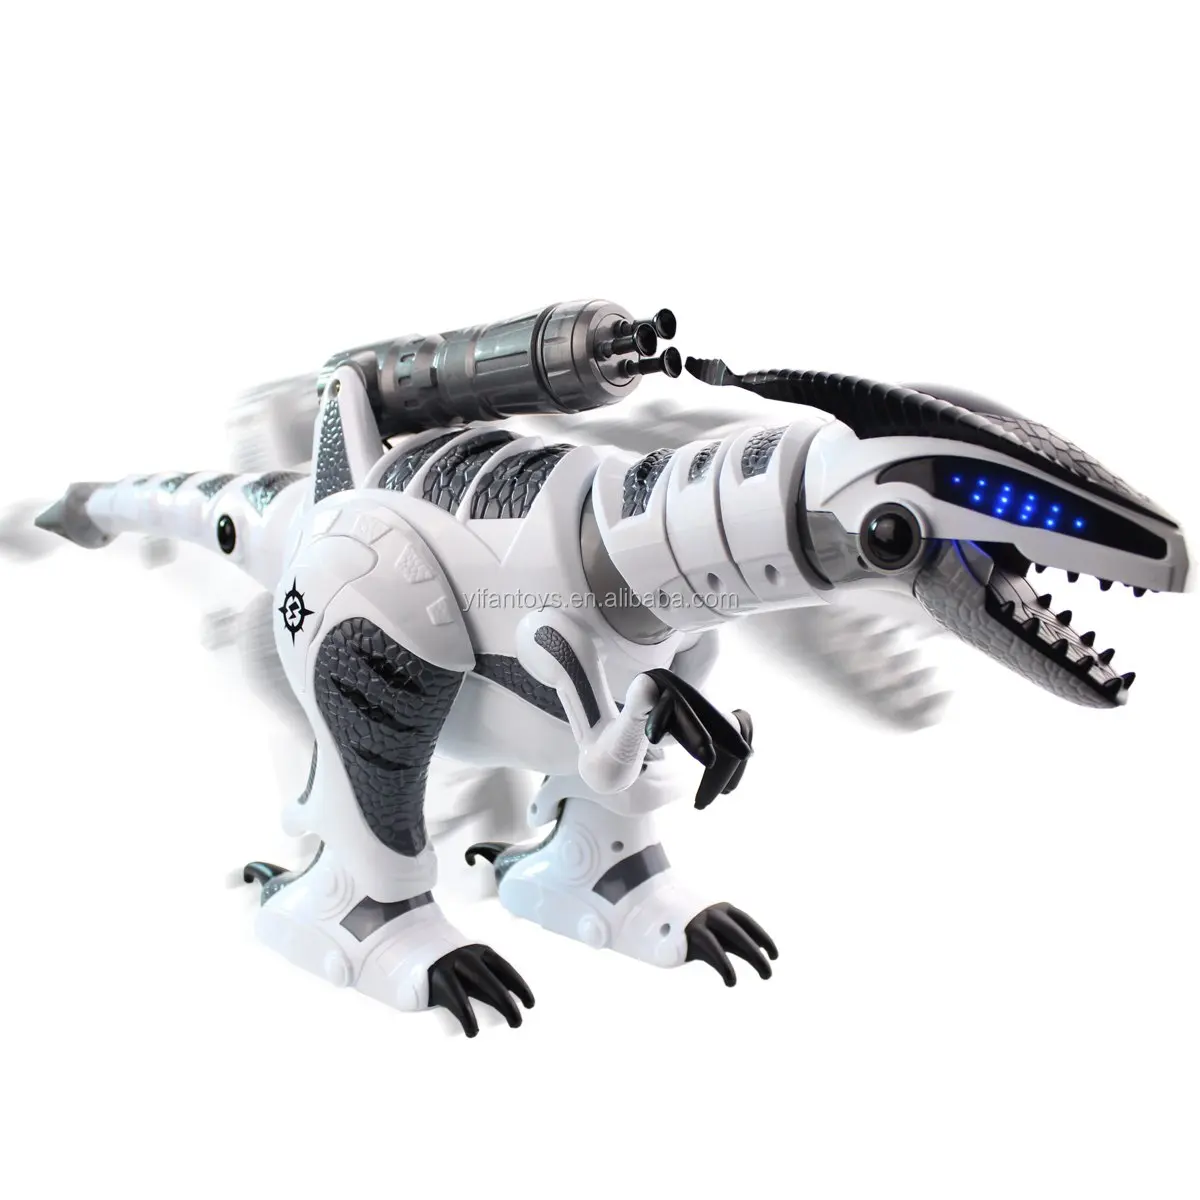 Kids Intelligent Interactive Toy Electronic Remote Controller Dinosaur White Costzon RC Robot Dinosaur Walking Dancing Singing w/ Fight Mode Programmable Robot Gift for Children Boys and Girls 